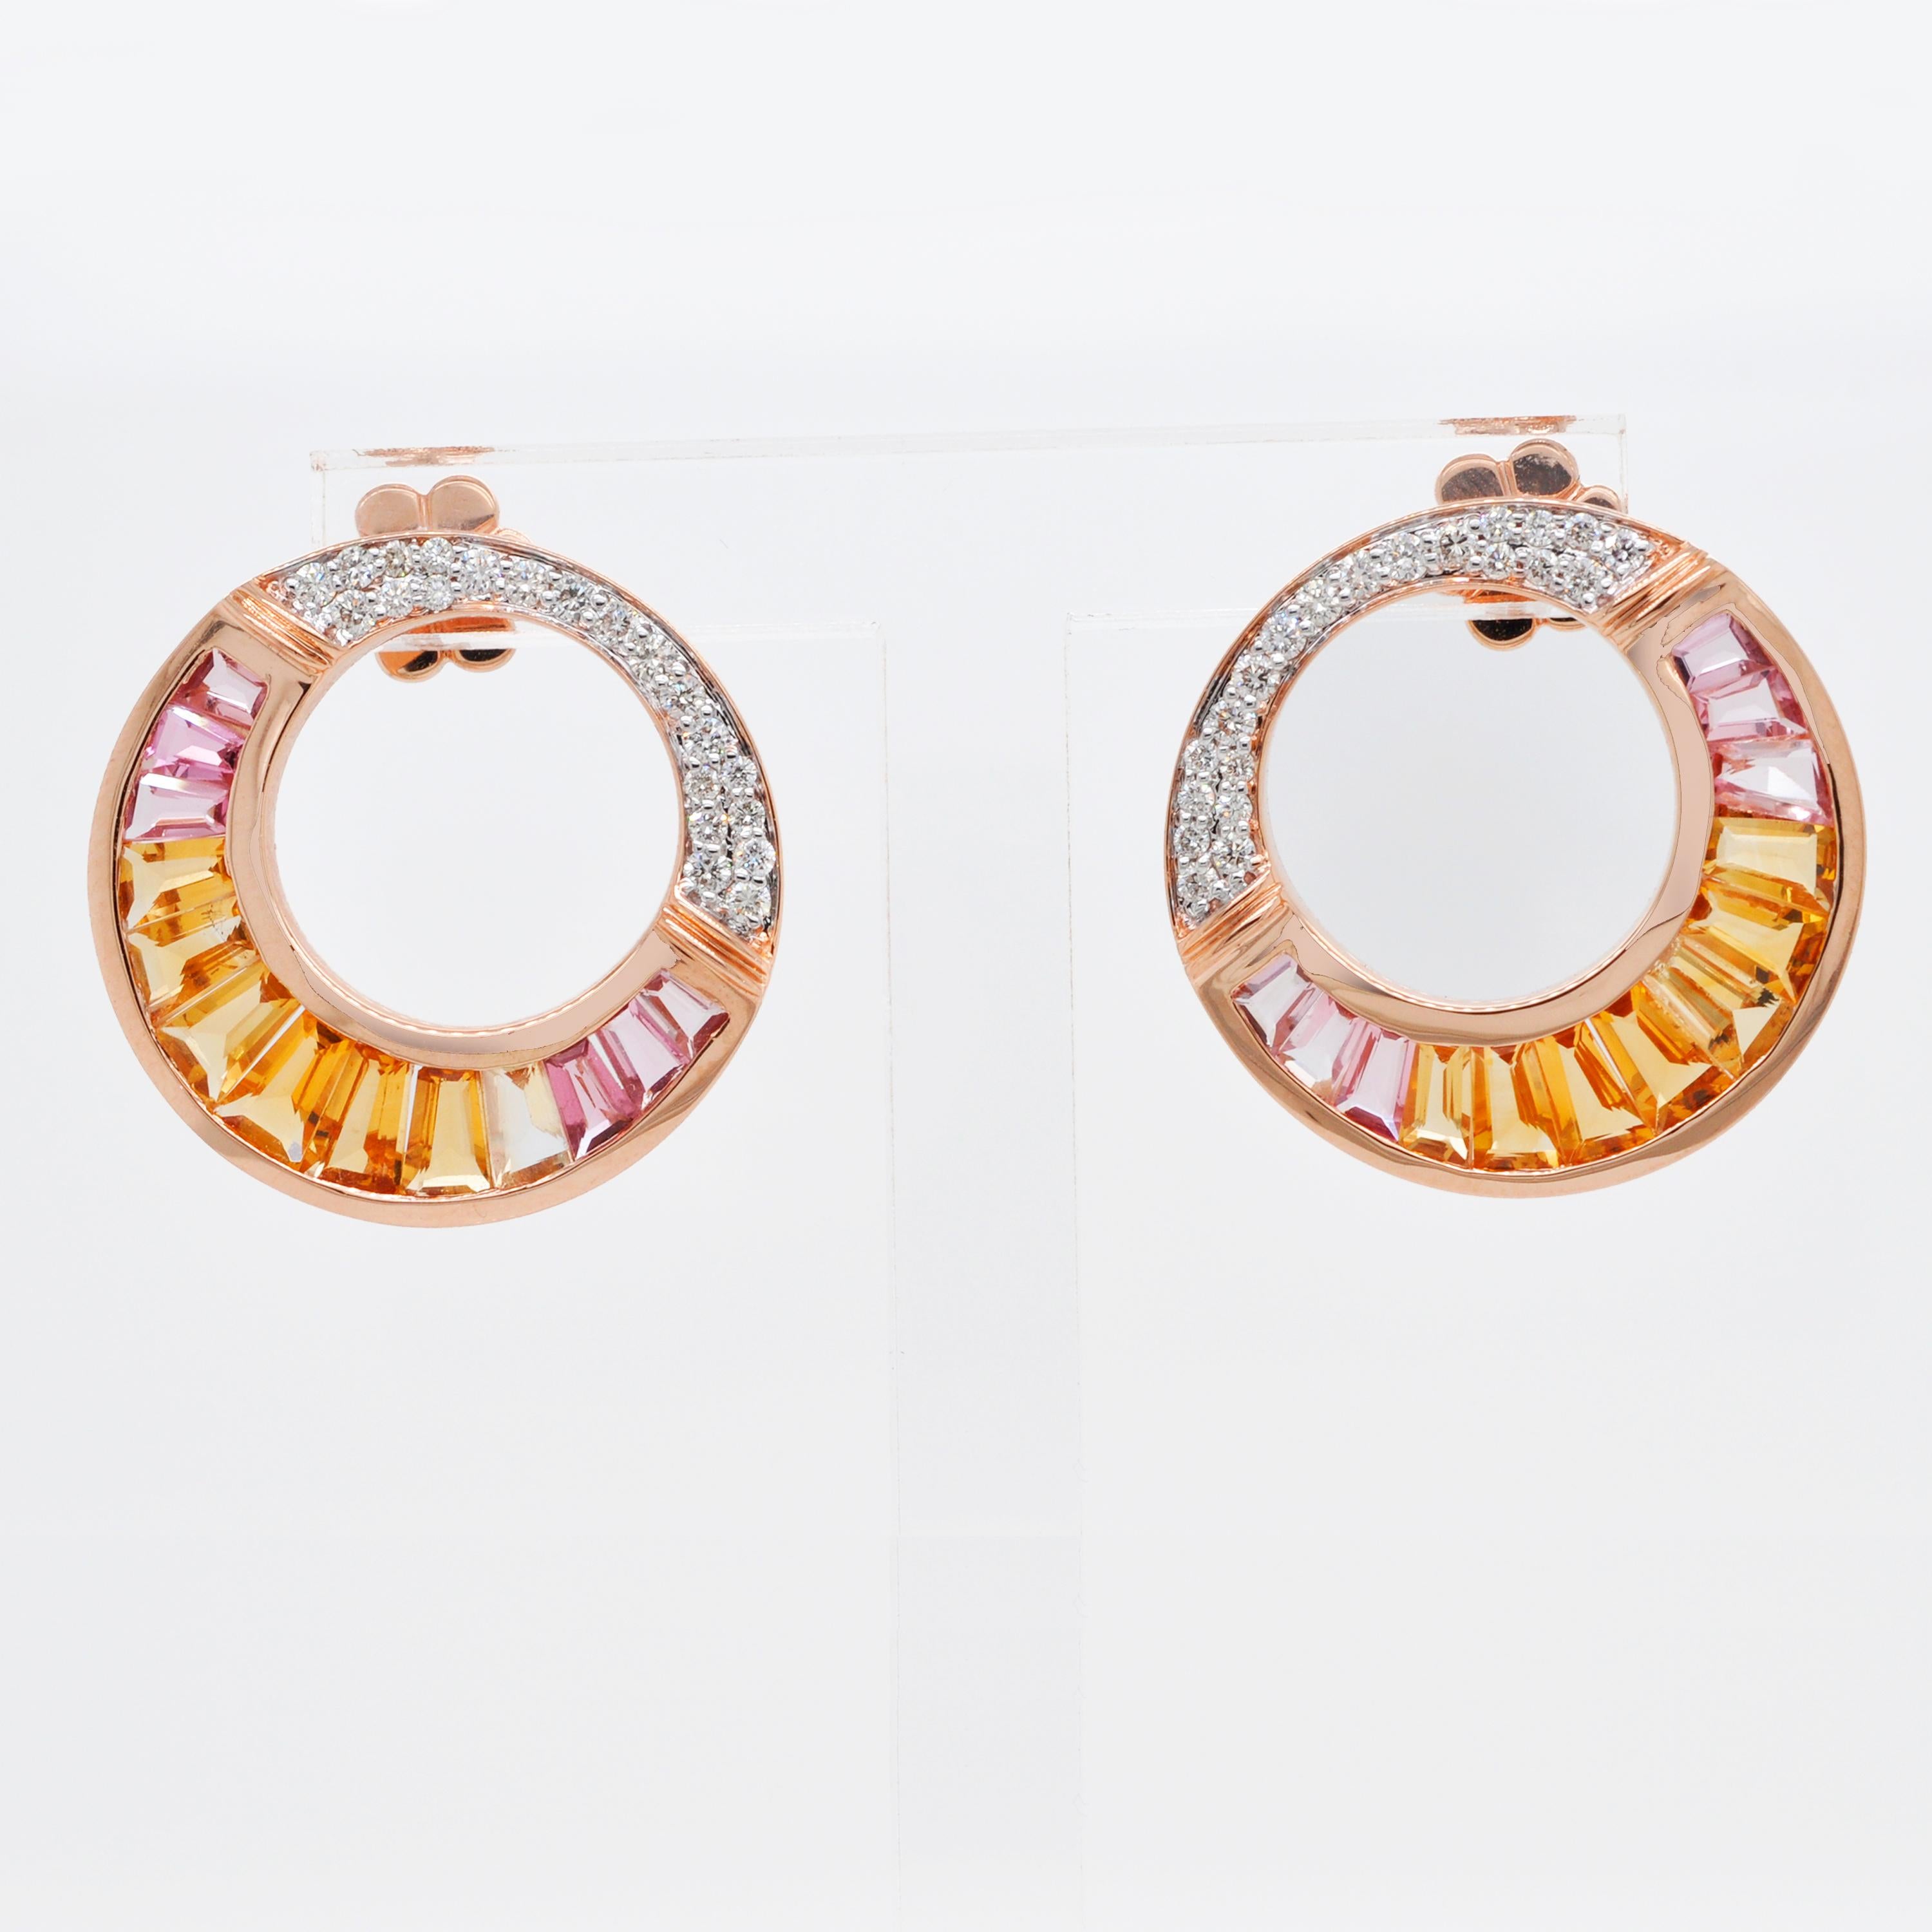 18 karat rose gold citrine peach tourmaline baguette diamond stud earrings.

These 18 karat rose gold citrine peach tourmaline baguette and diamond circular stud earrings are inspired by the jewels worn by Cleopatra in the Egyptian Era, giving it a